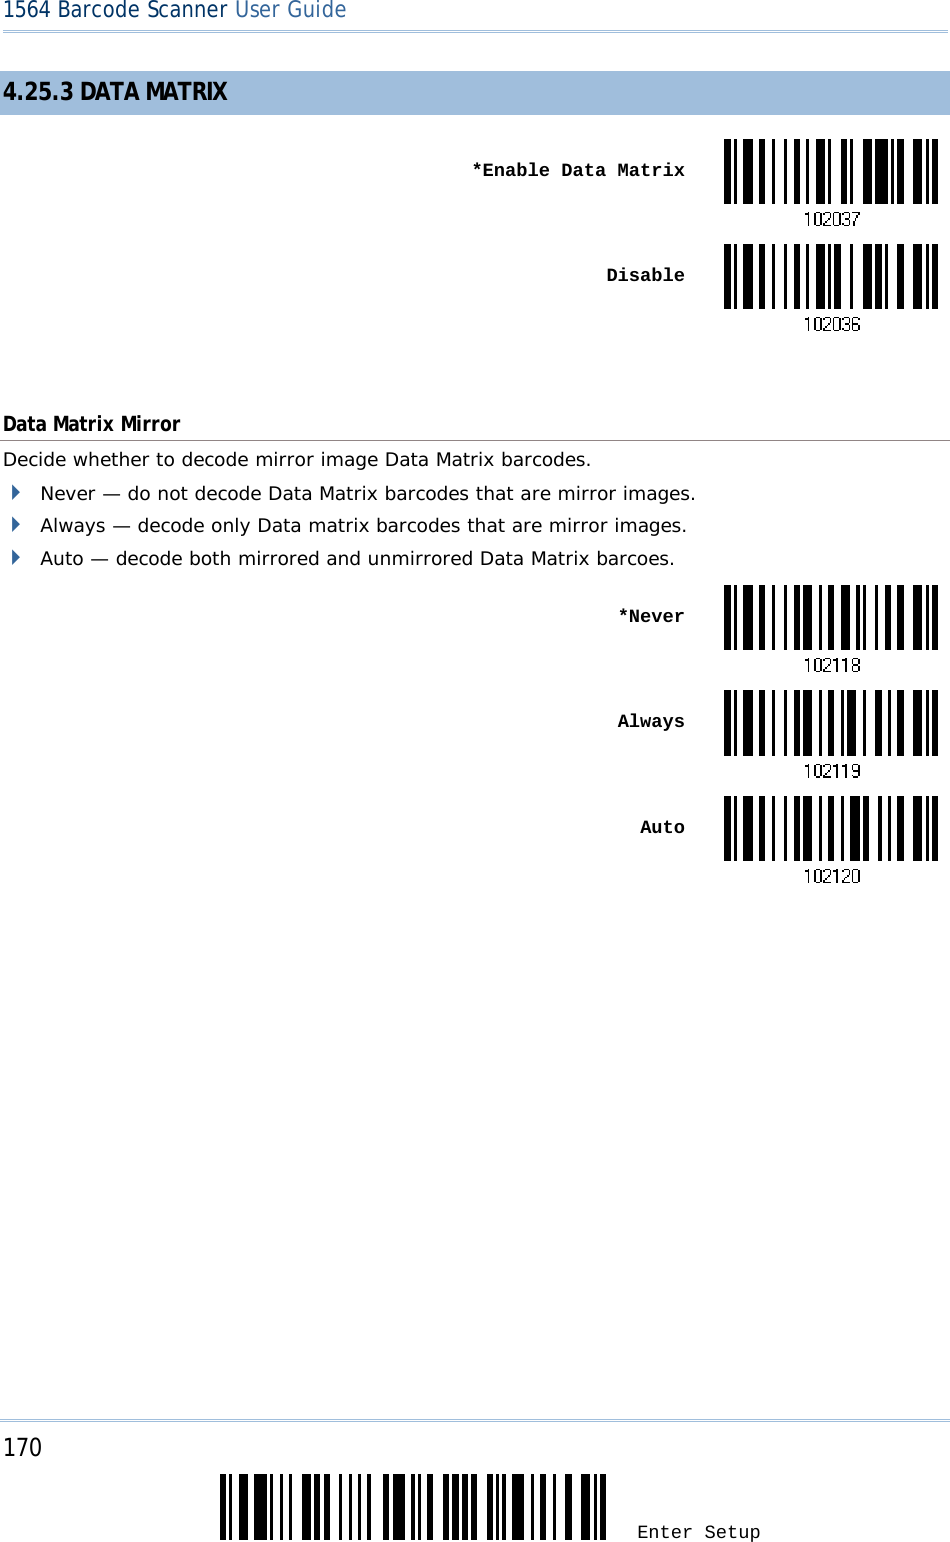 170 Enter Setup 1564 Barcode Scanner User Guide  4.25.3 DATA MATRIX  *Enable Data Matrix Disable Data Matrix Mirror Decide whether to decode mirror image Data Matrix barcodes.  Never — do not decode Data Matrix barcodes that are mirror images.  Always — decode only Data matrix barcodes that are mirror images.  Auto — decode both mirrored and unmirrored Data Matrix barcoes.  *Never Always Auto